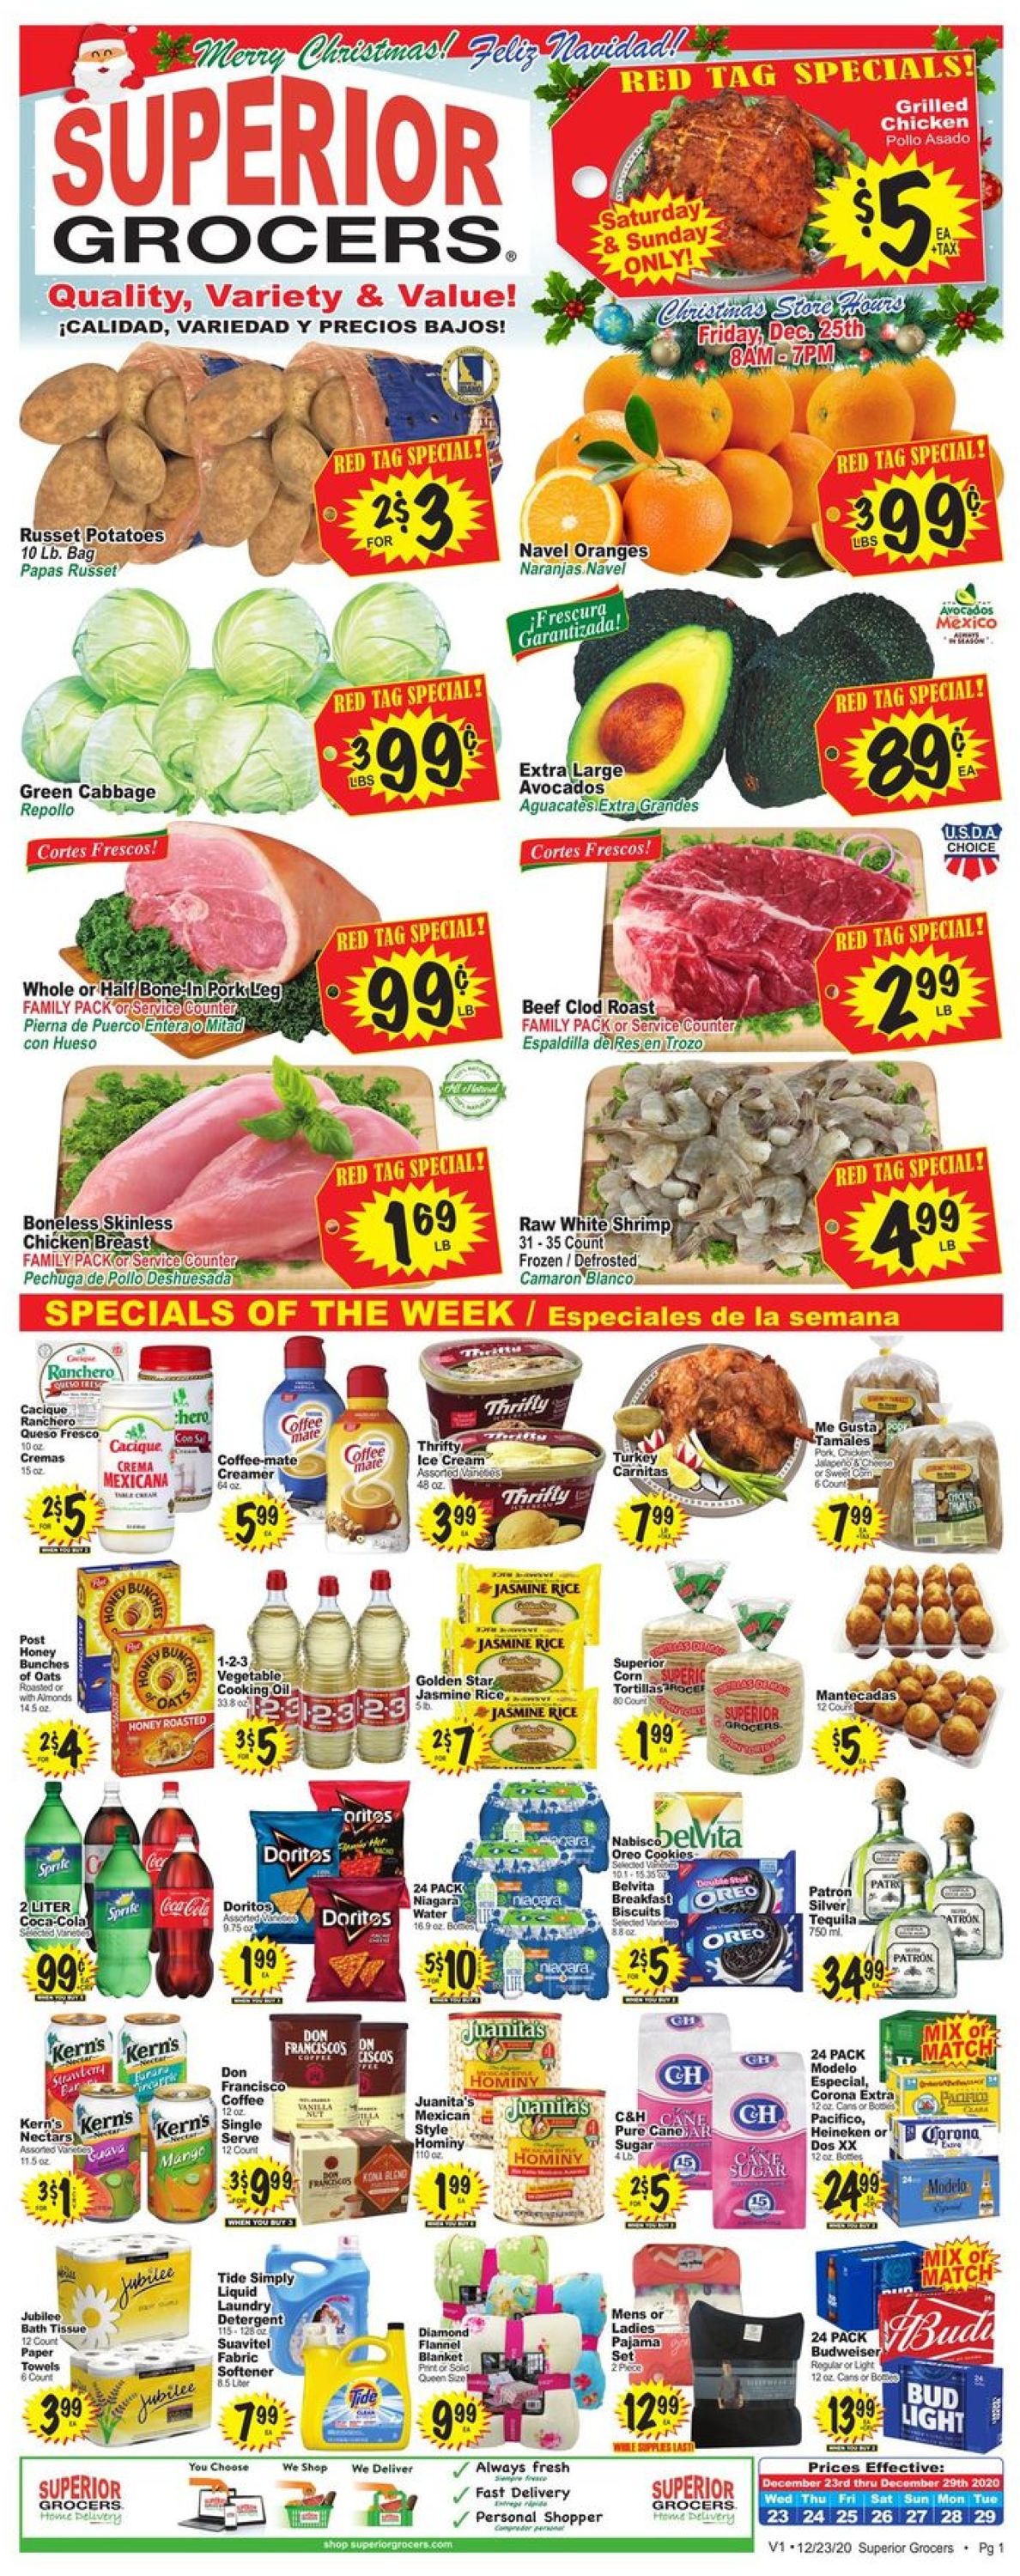 Superior Grocers Current weekly ad 12/23 - 12/29/2020 - frequent-ads.com